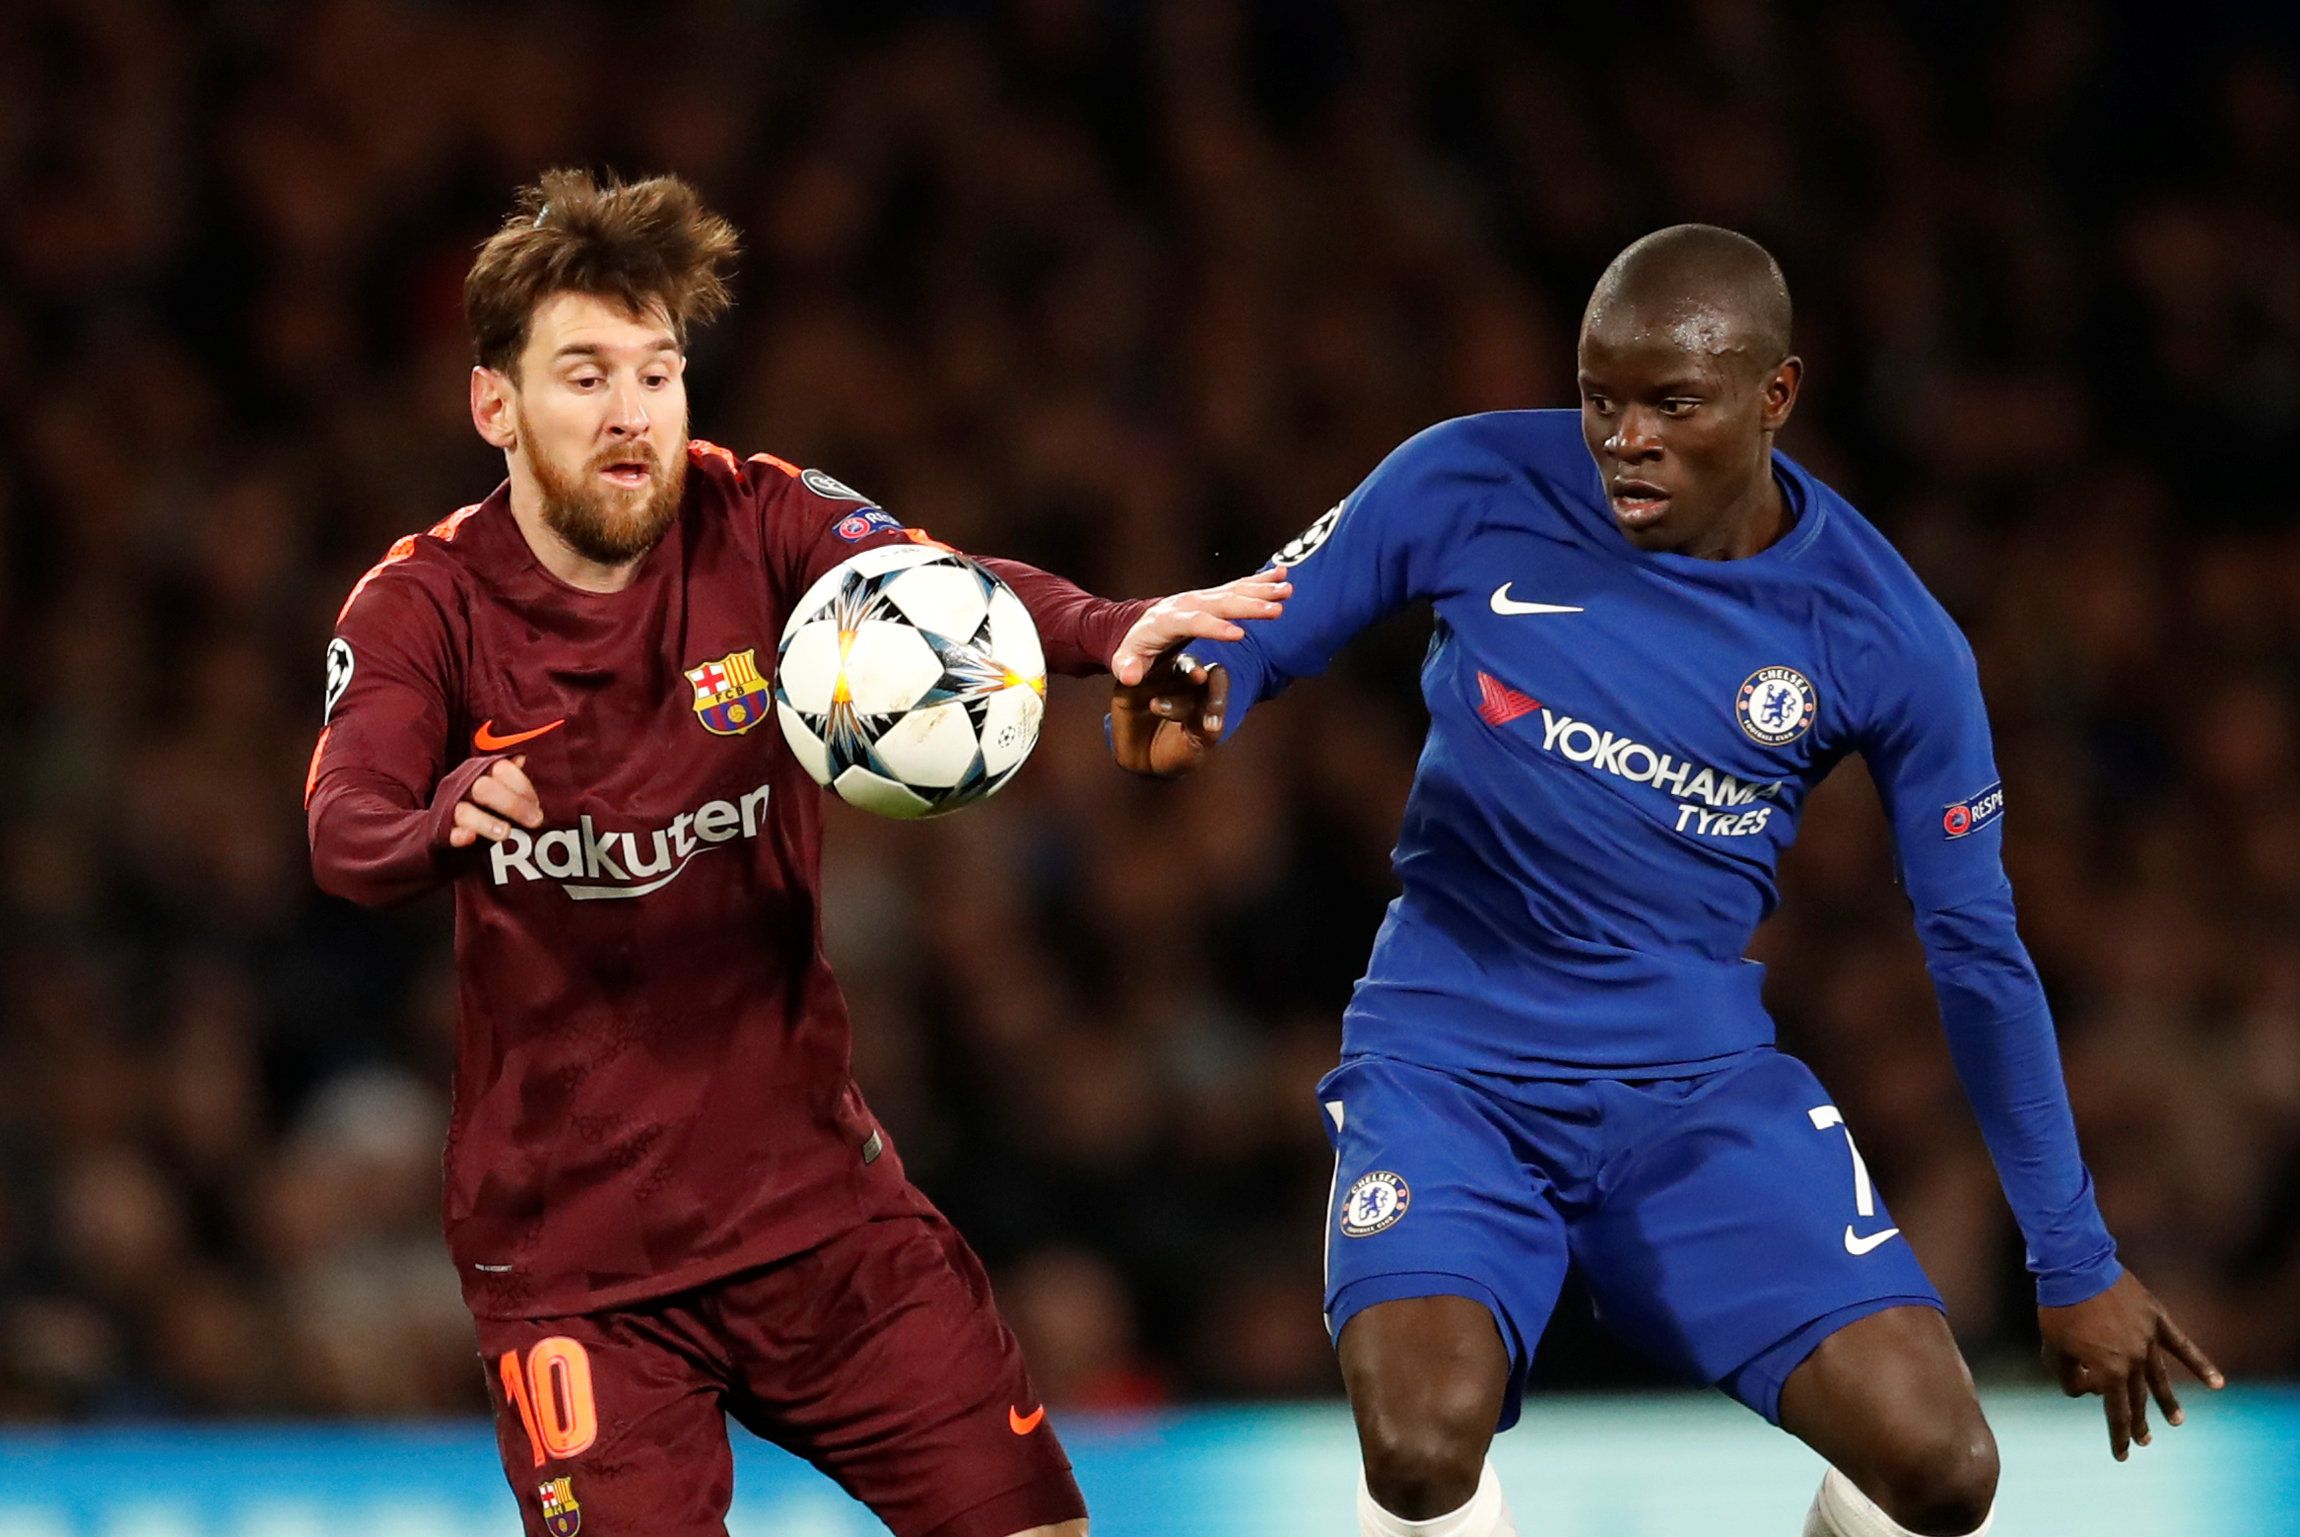 Soccer Football - Champions League Round of 16 First Leg - Chelsea vs FC Barcelona - Stamford Bridge, London, Britain - February 20, 2018   Barcelona’s Lionel Messi in action with Chelsea's N'Golo Kante                    Action Images via Reuters/Andrew Boyers